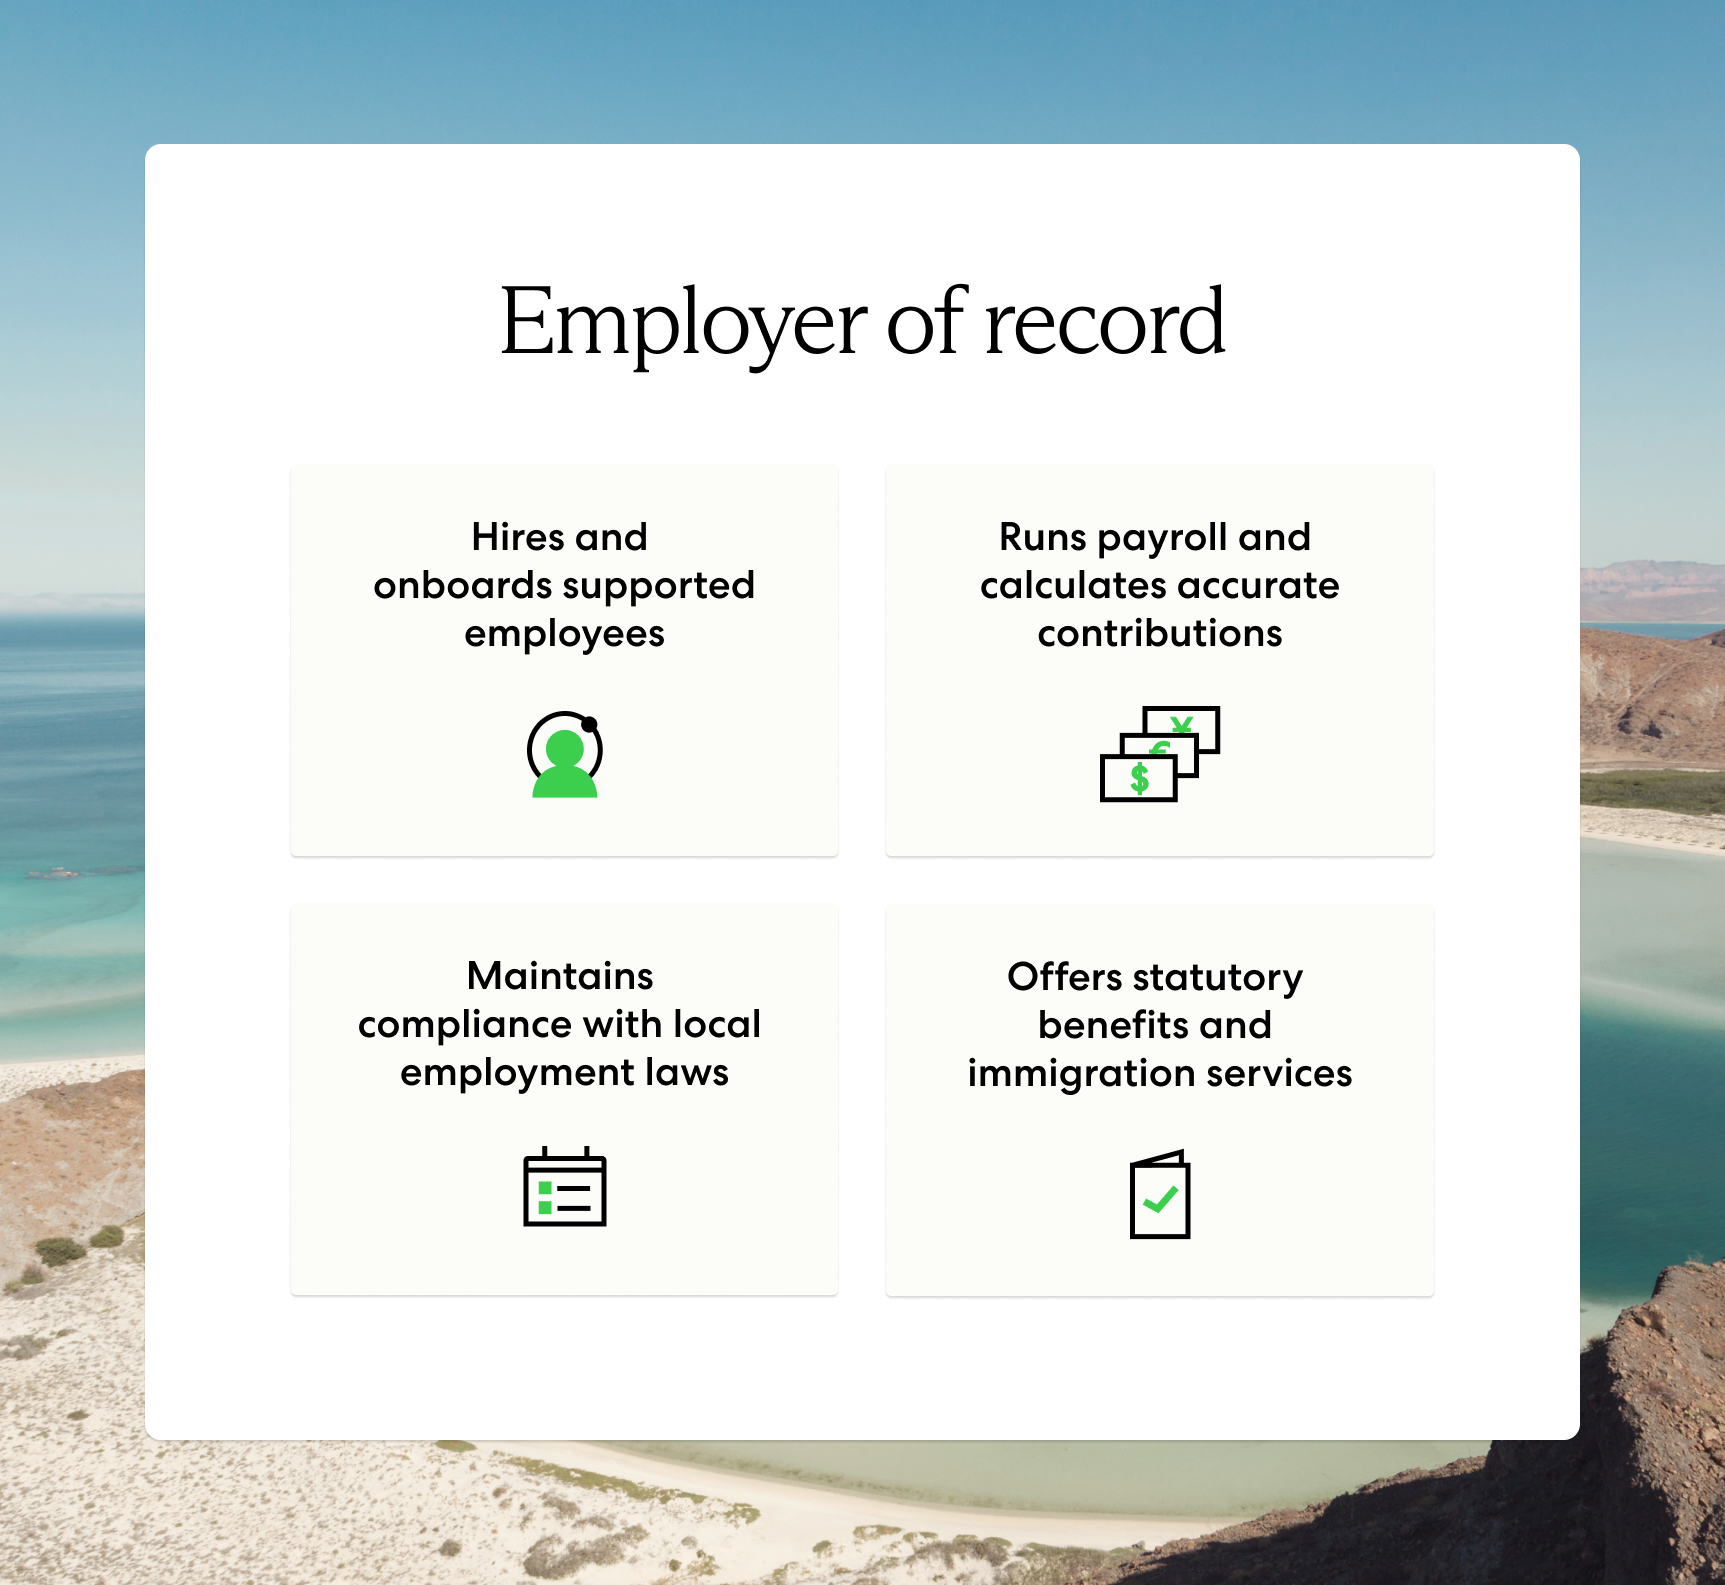 An employer of record hires and onboards supported employees, runs payroll, maintains compliance and offers statutory benefits